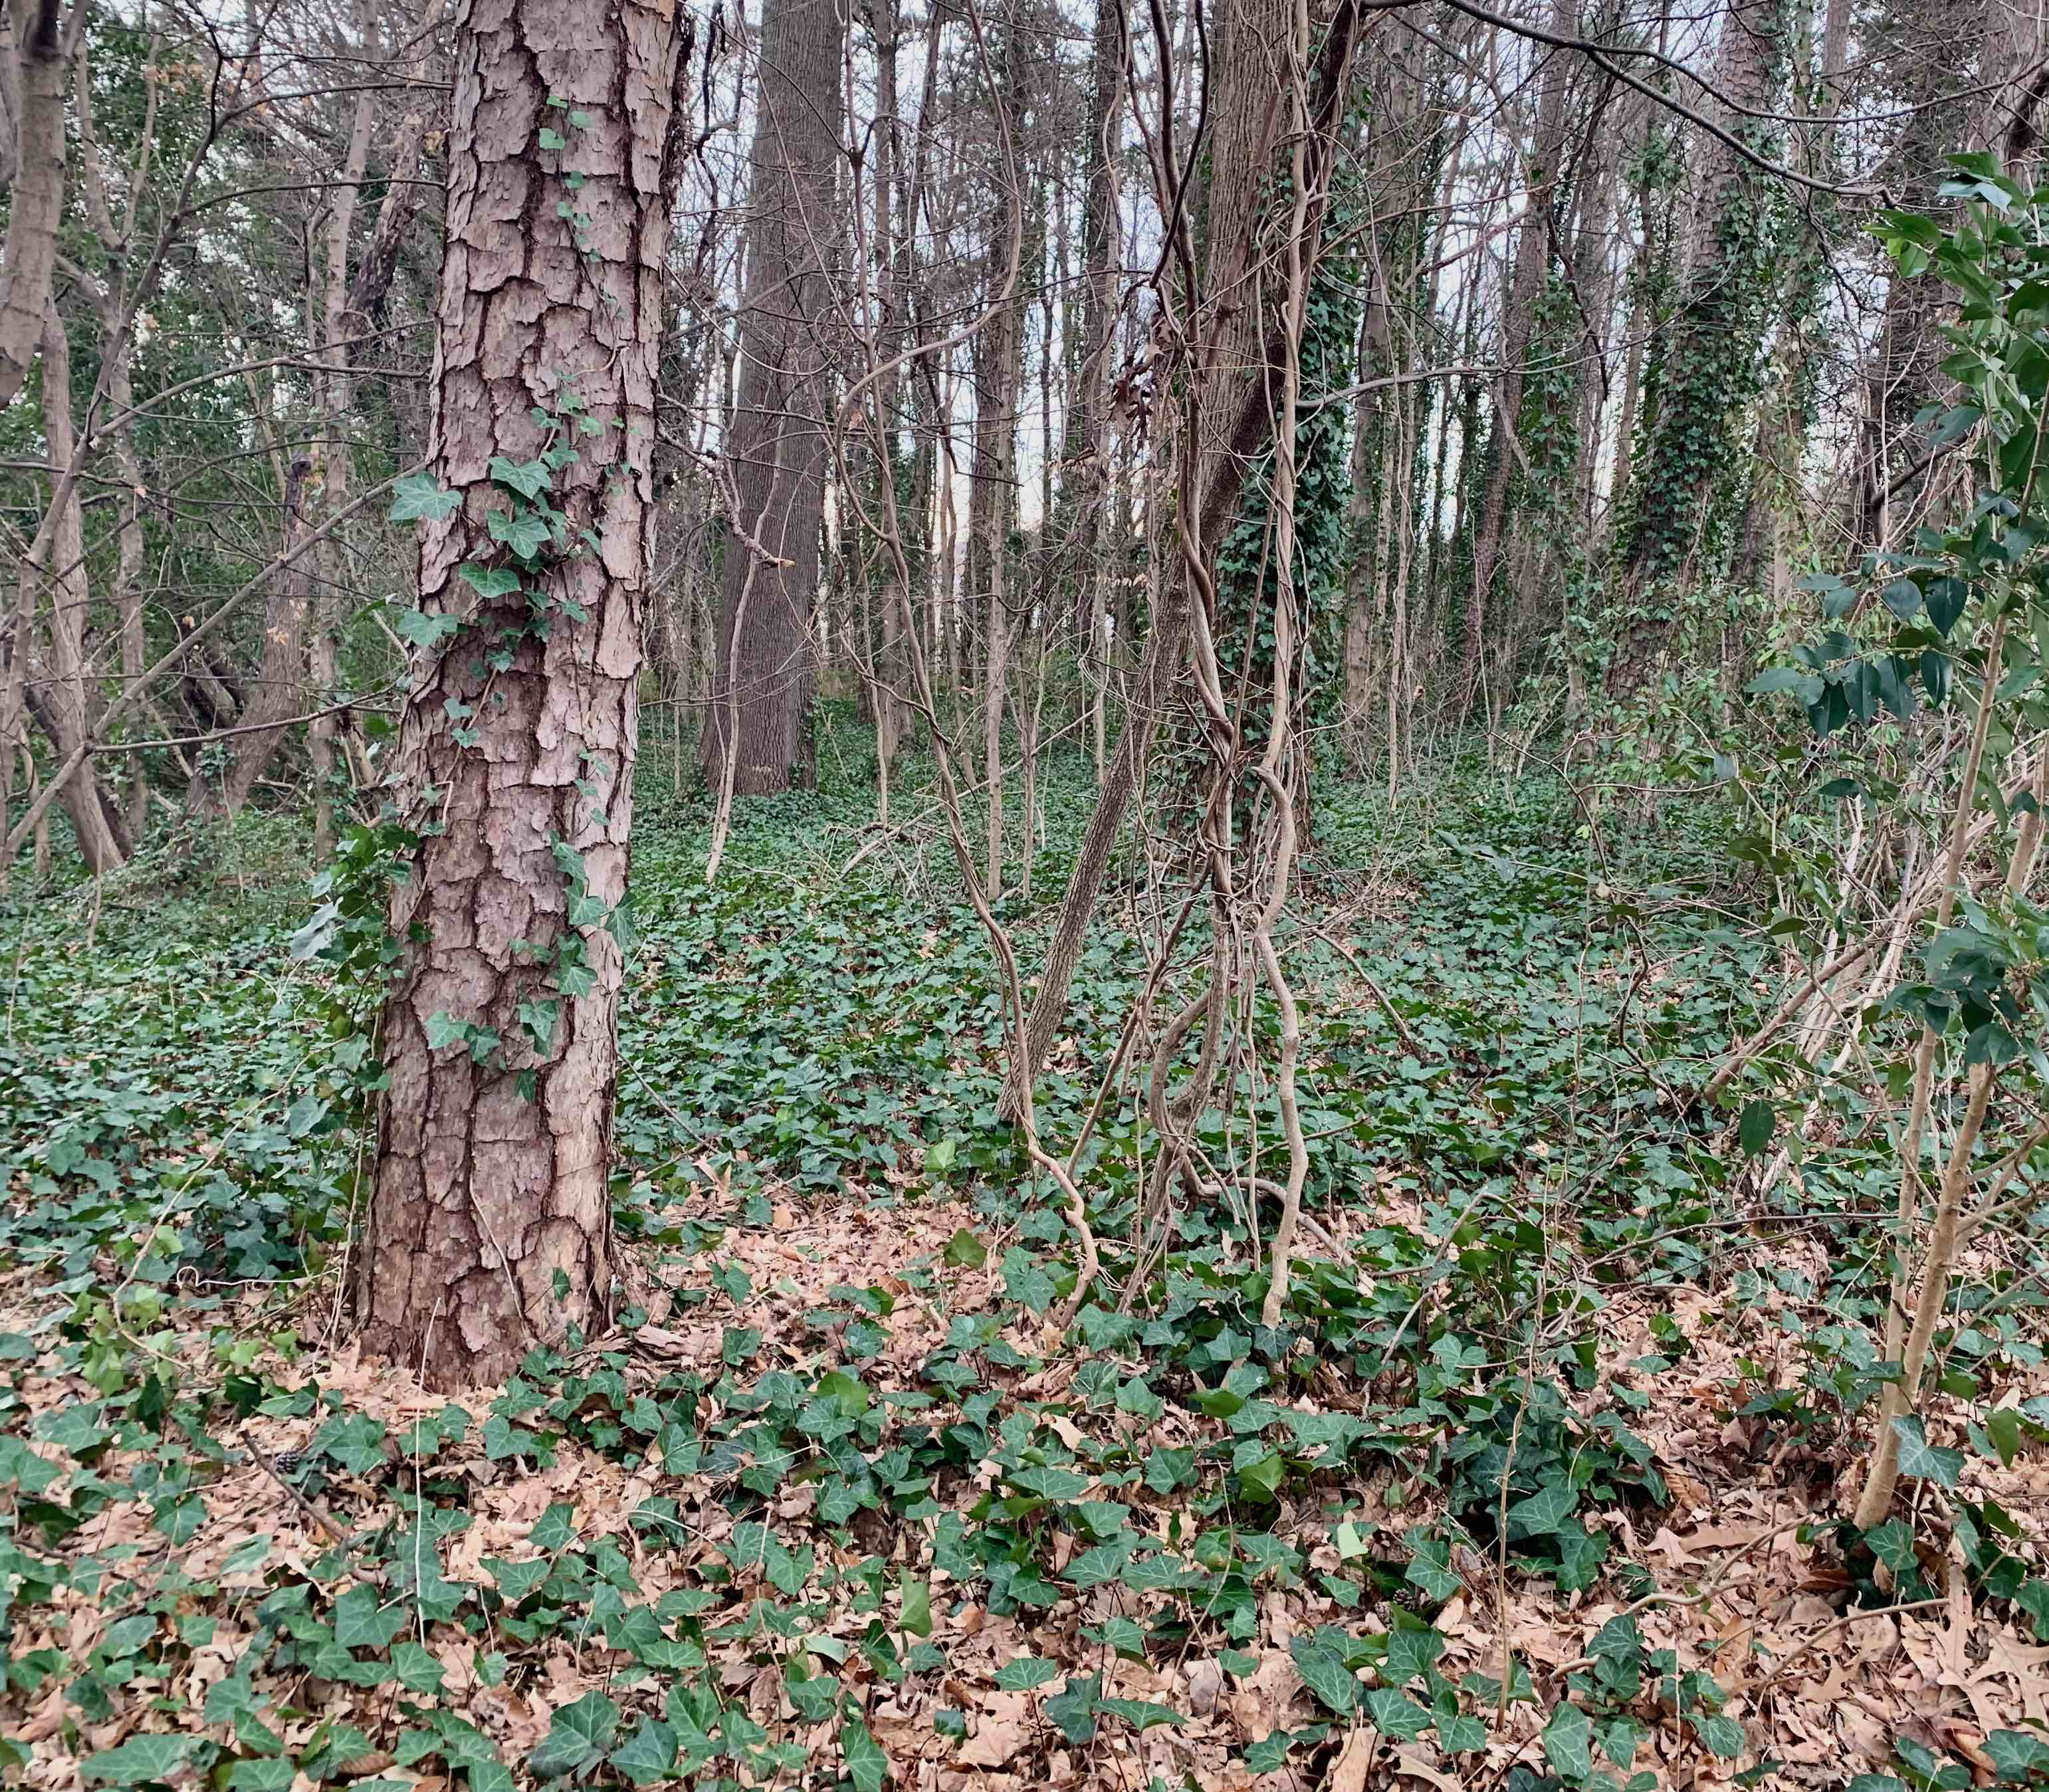 The Scientific Name is Hedera helix var. helix. You will likely hear them called English Ivy, Common Ivy. This picture shows the English Ivy can cover a forest floor, creating an 